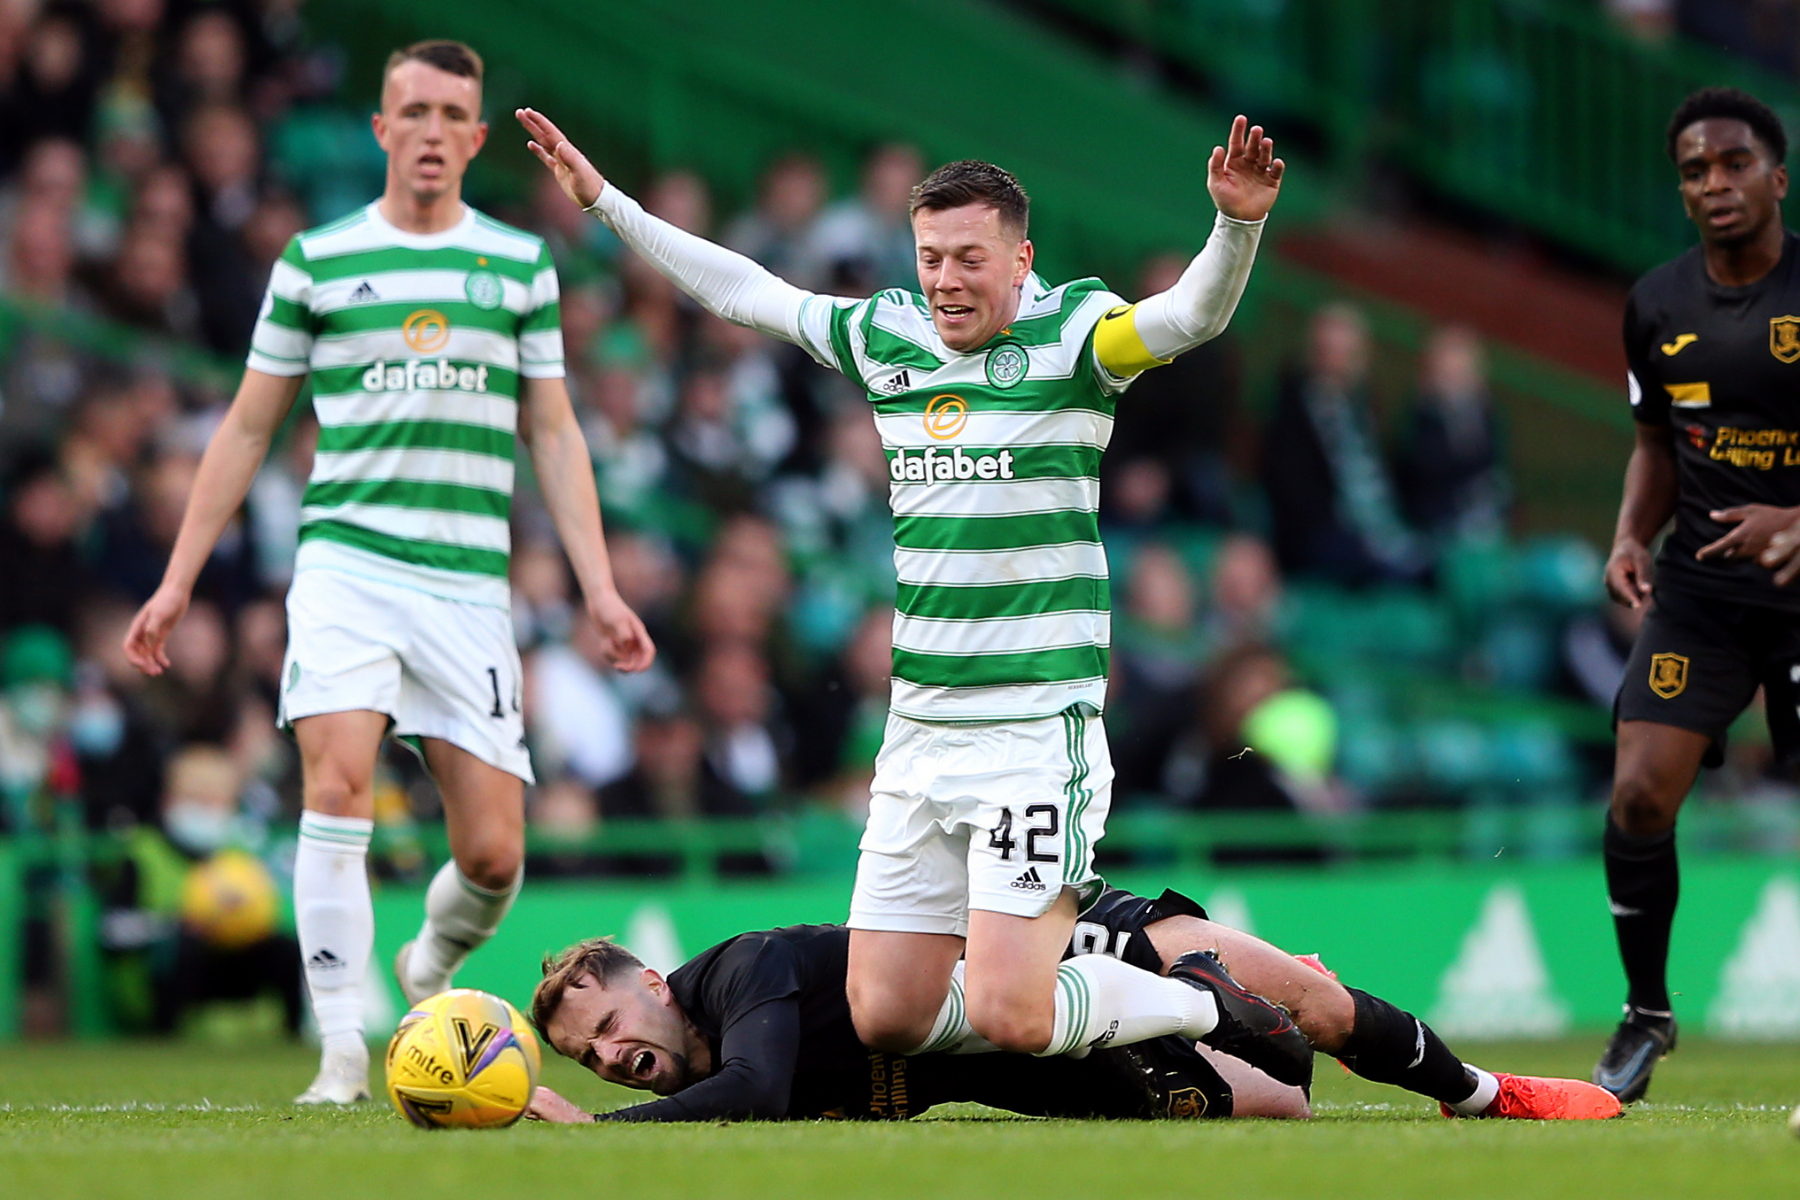 Livingston stalemate shows Celtic still need to address familiar failings to reclaim Scottish title from Rangers